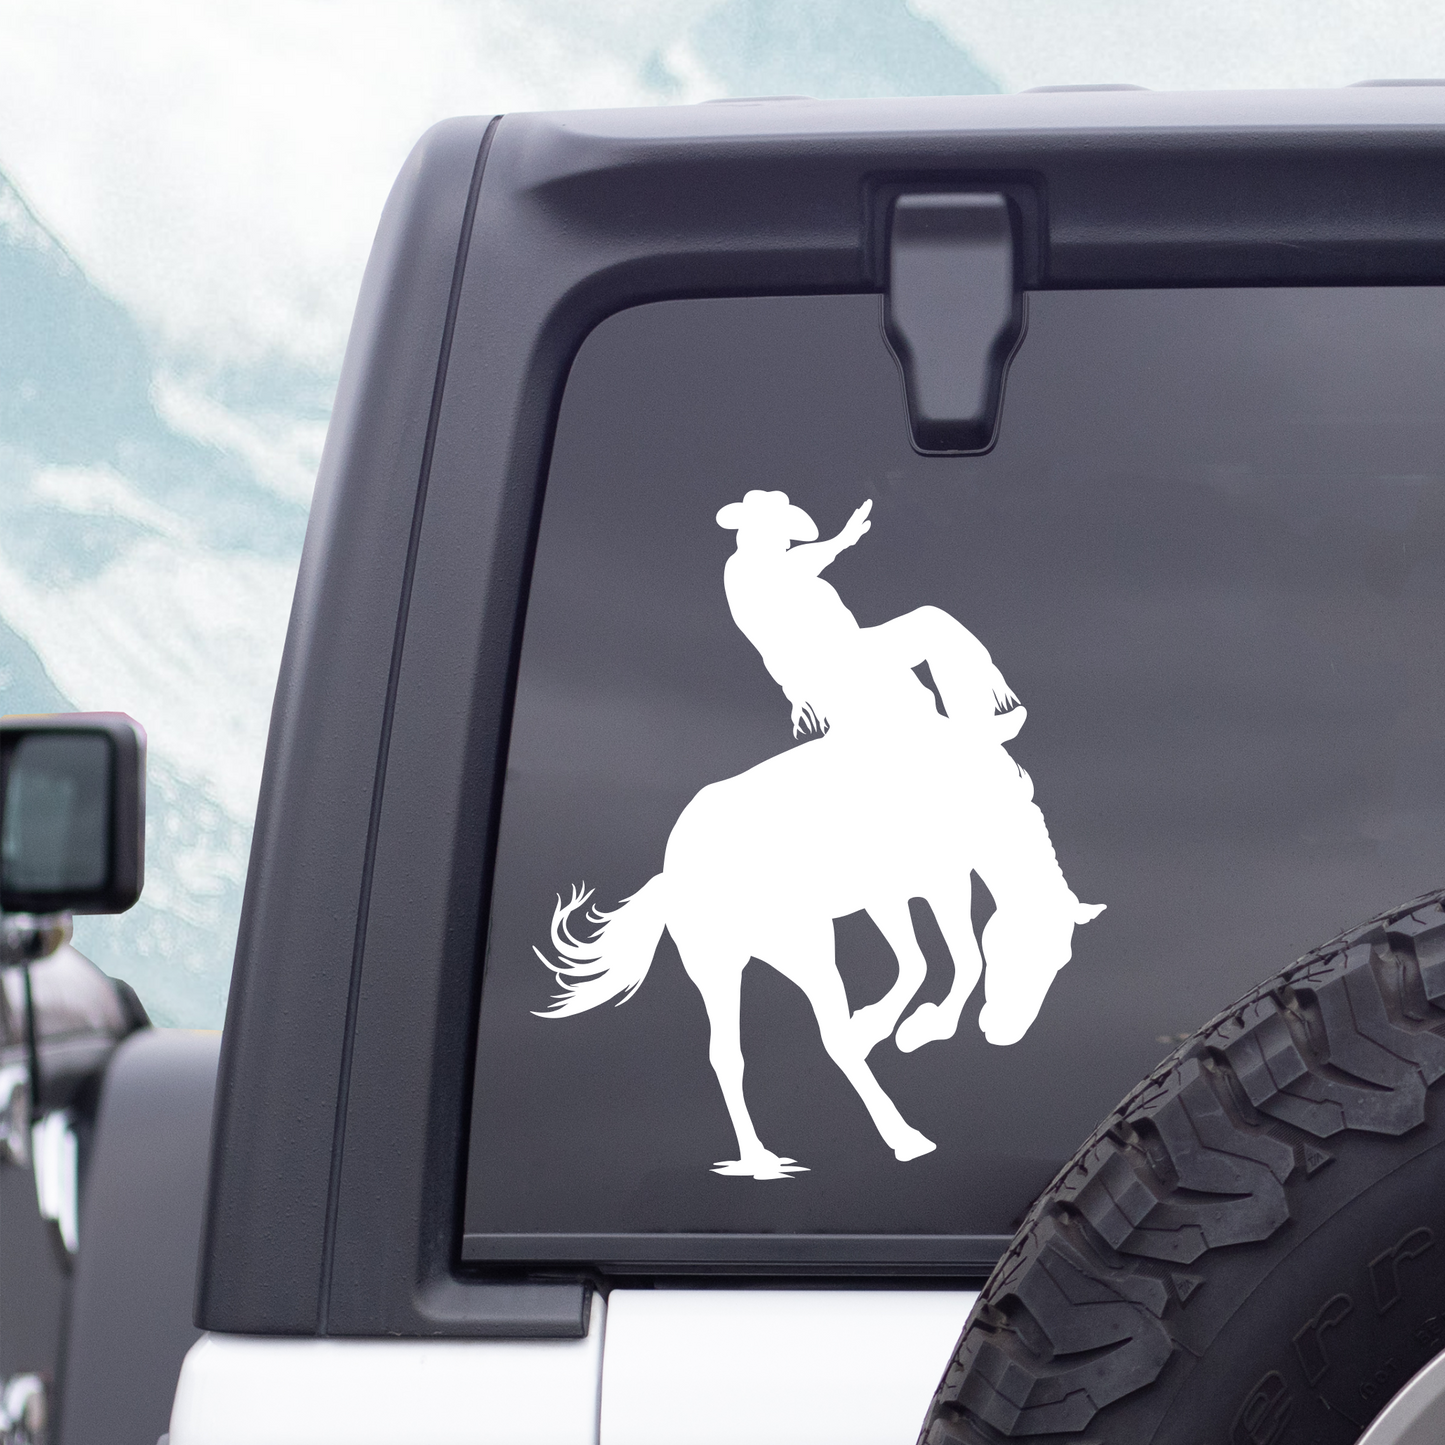 Bronc Riding Vinyl Decal Sticker, Rodeo Decal, Cowboy Decal